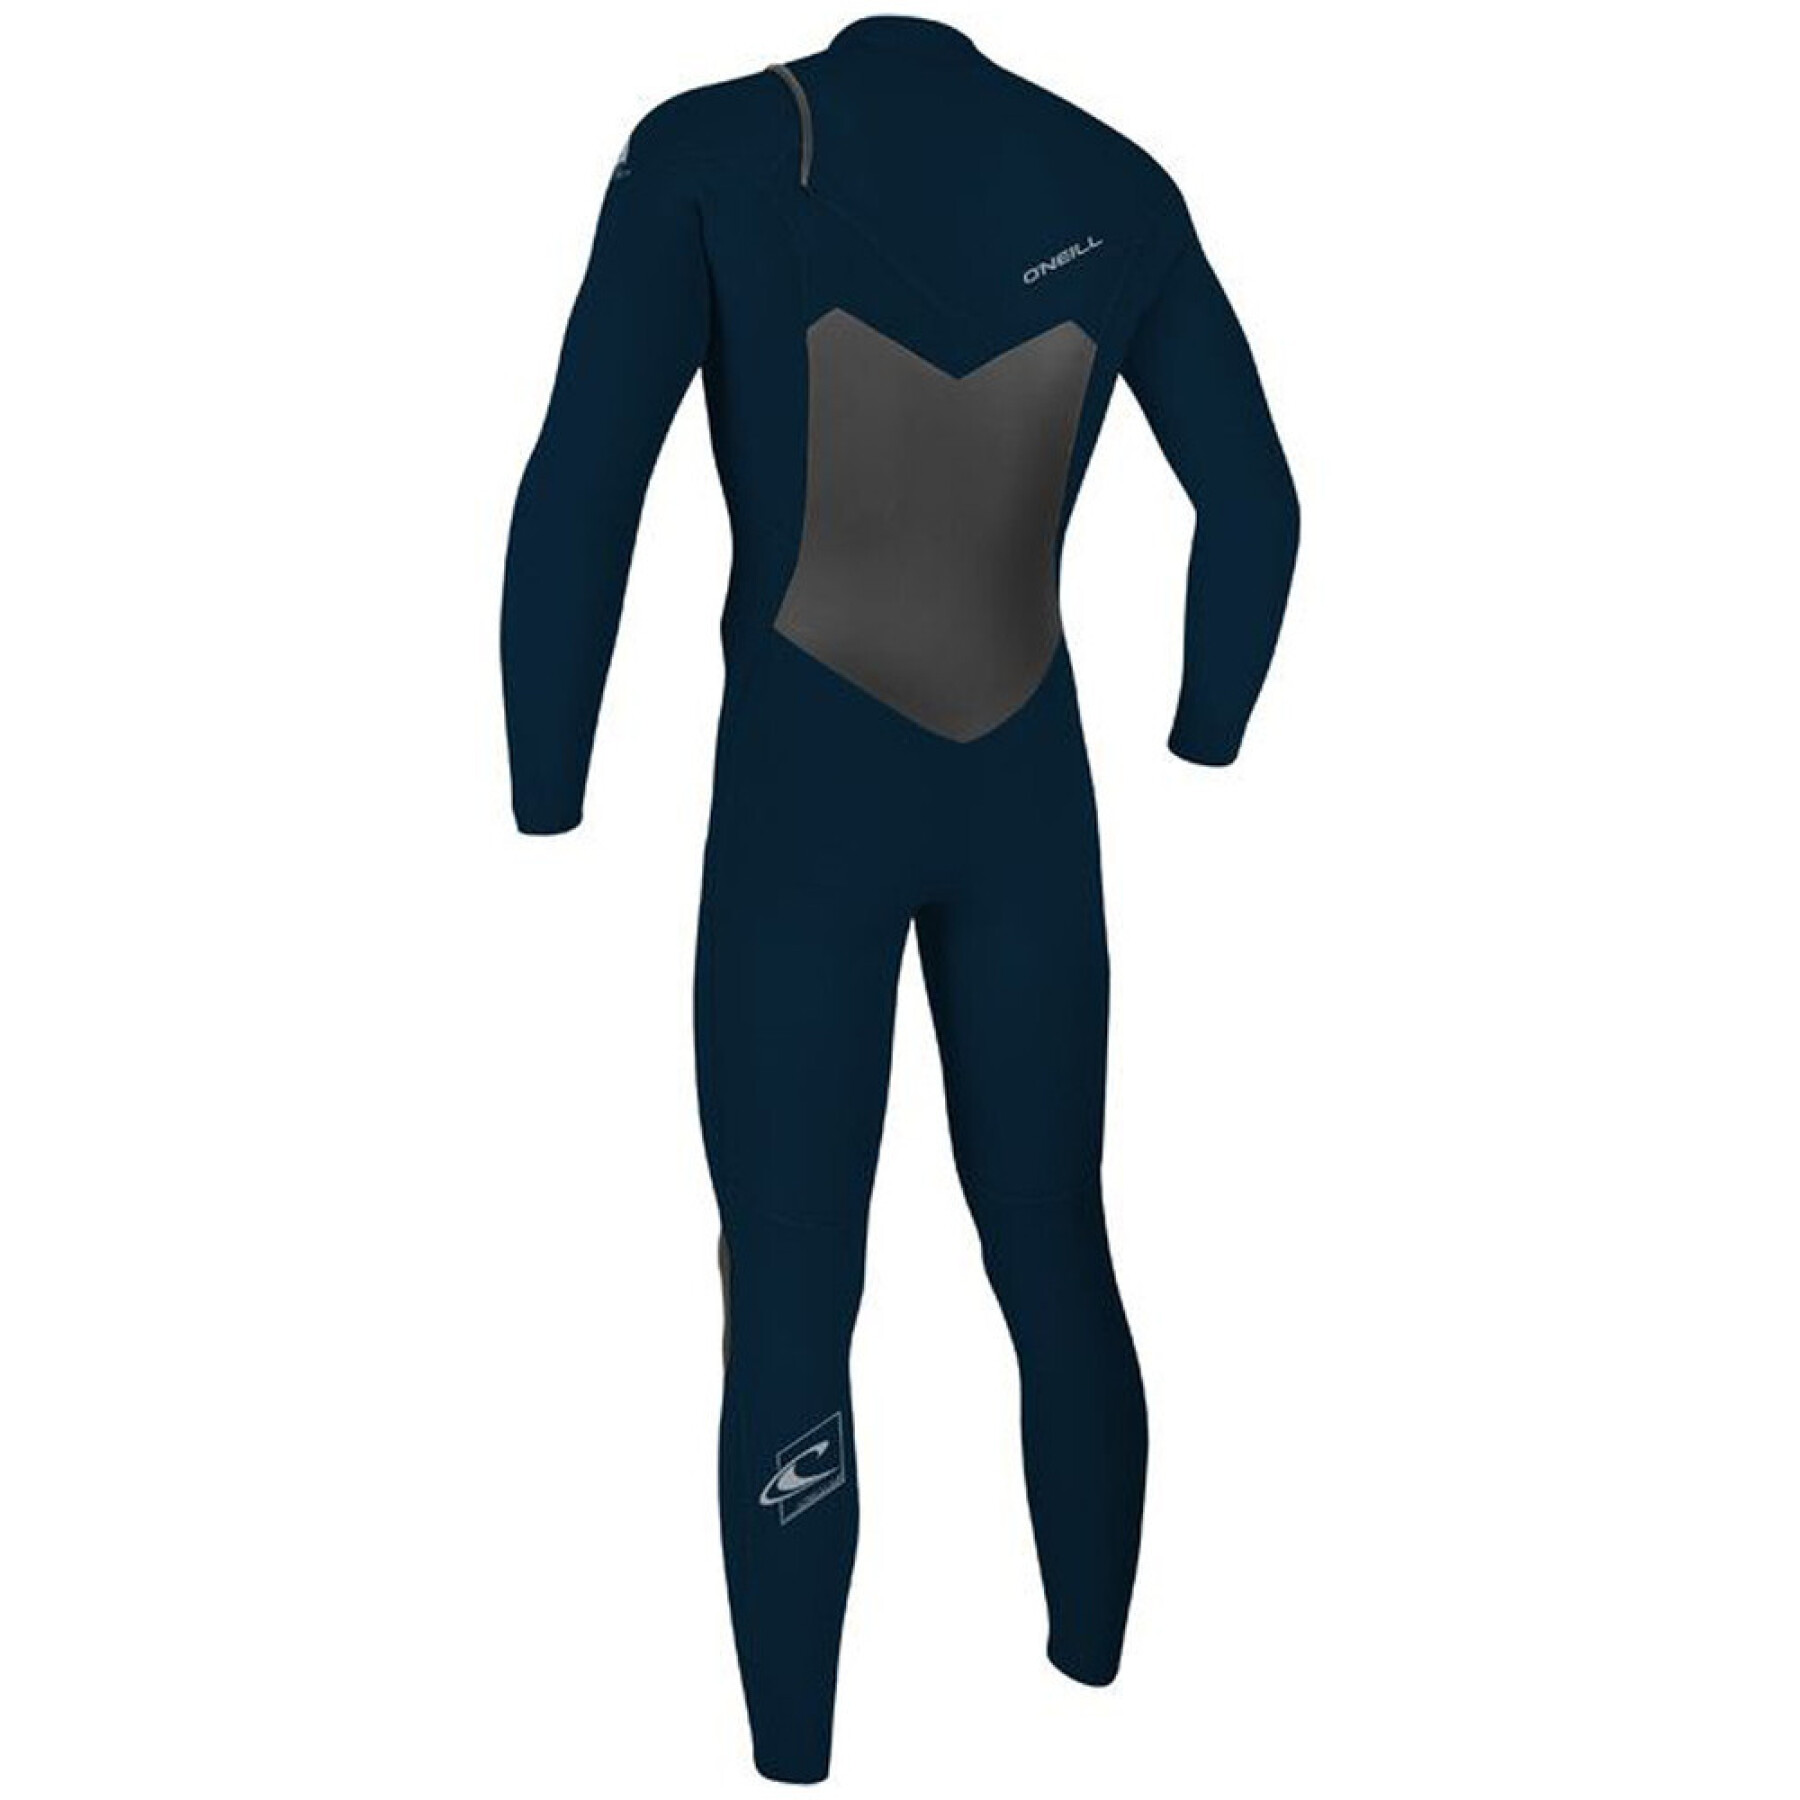 Surf wetsuit met borstrits O'Neill Epic 5/4